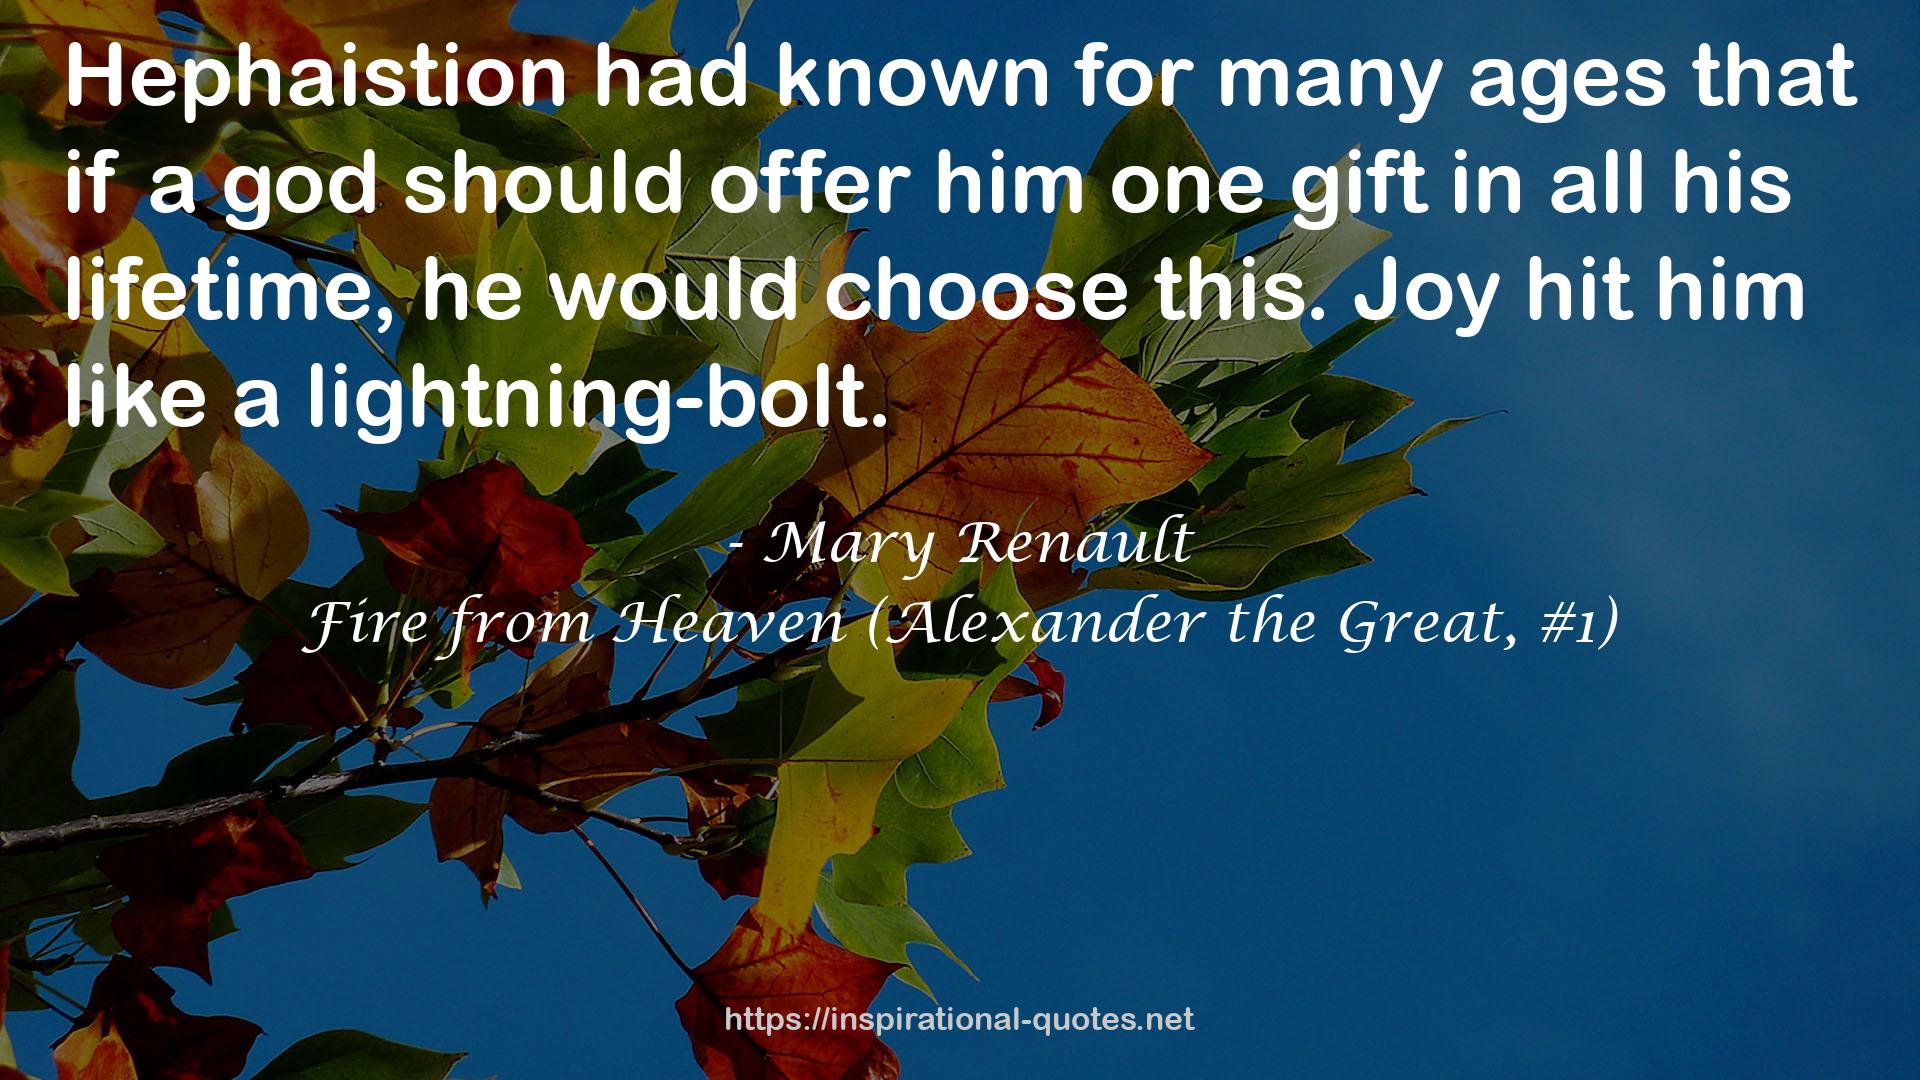 Mary Renault QUOTES